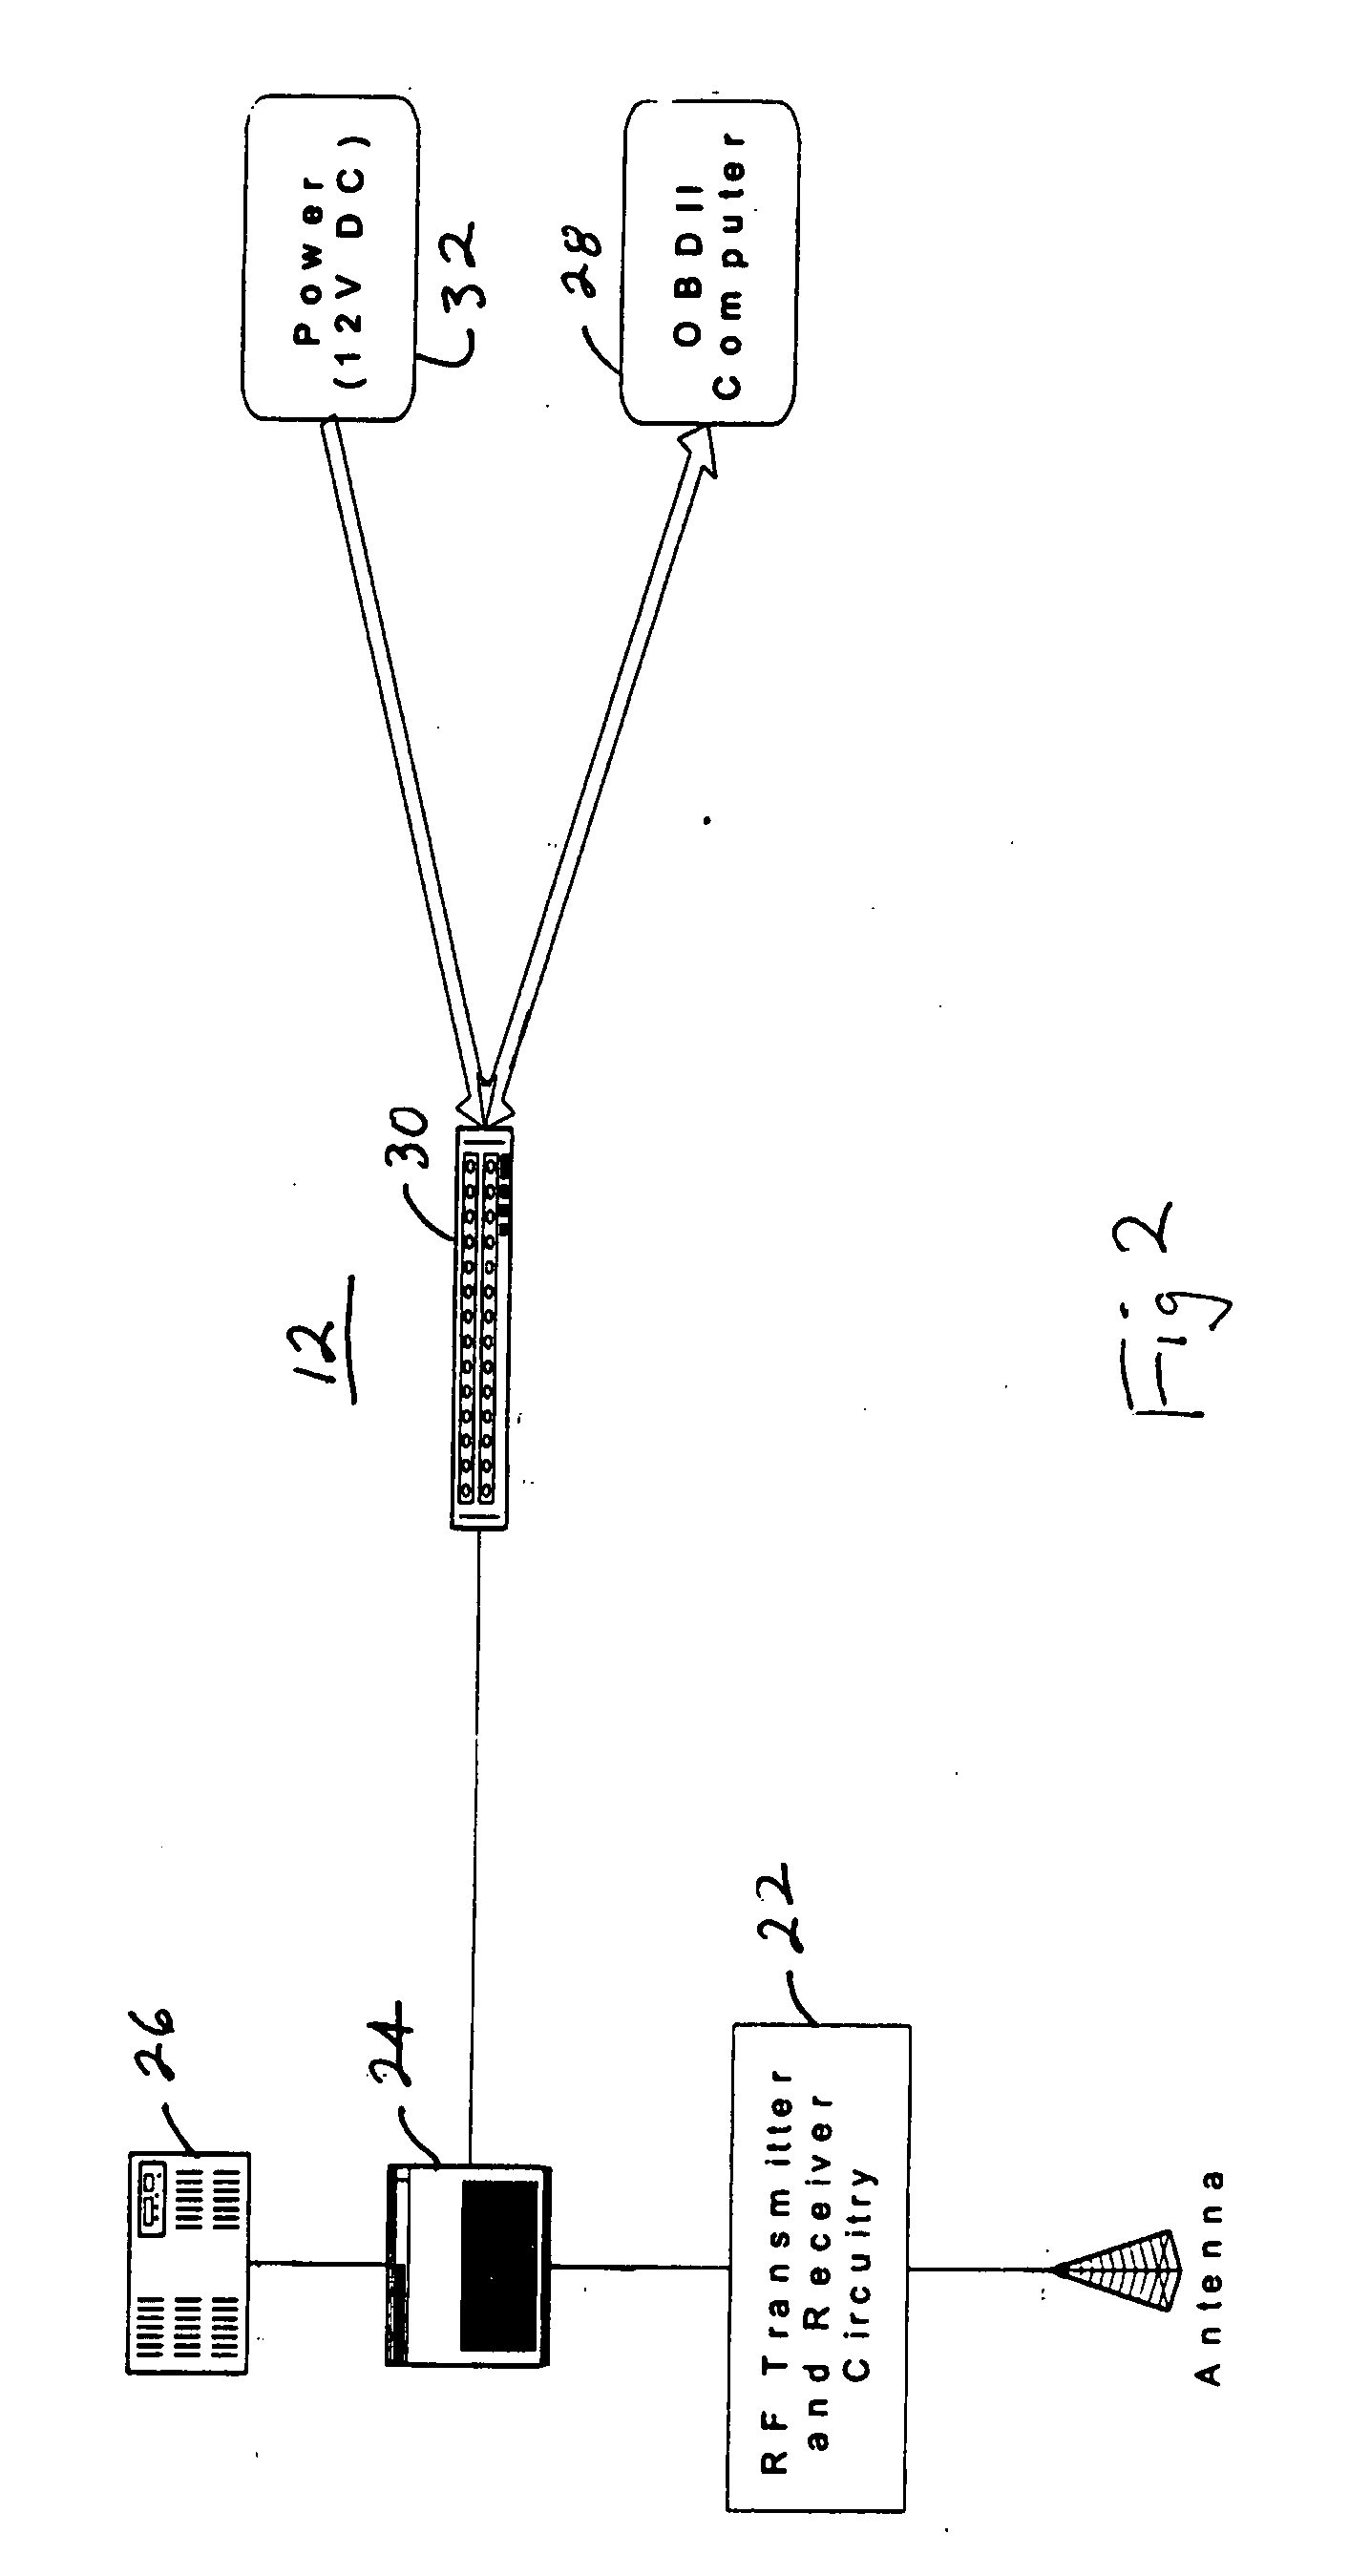 Vehicle environmental regulatory compliance system and method of verifying regulatory compliance of a vehicle